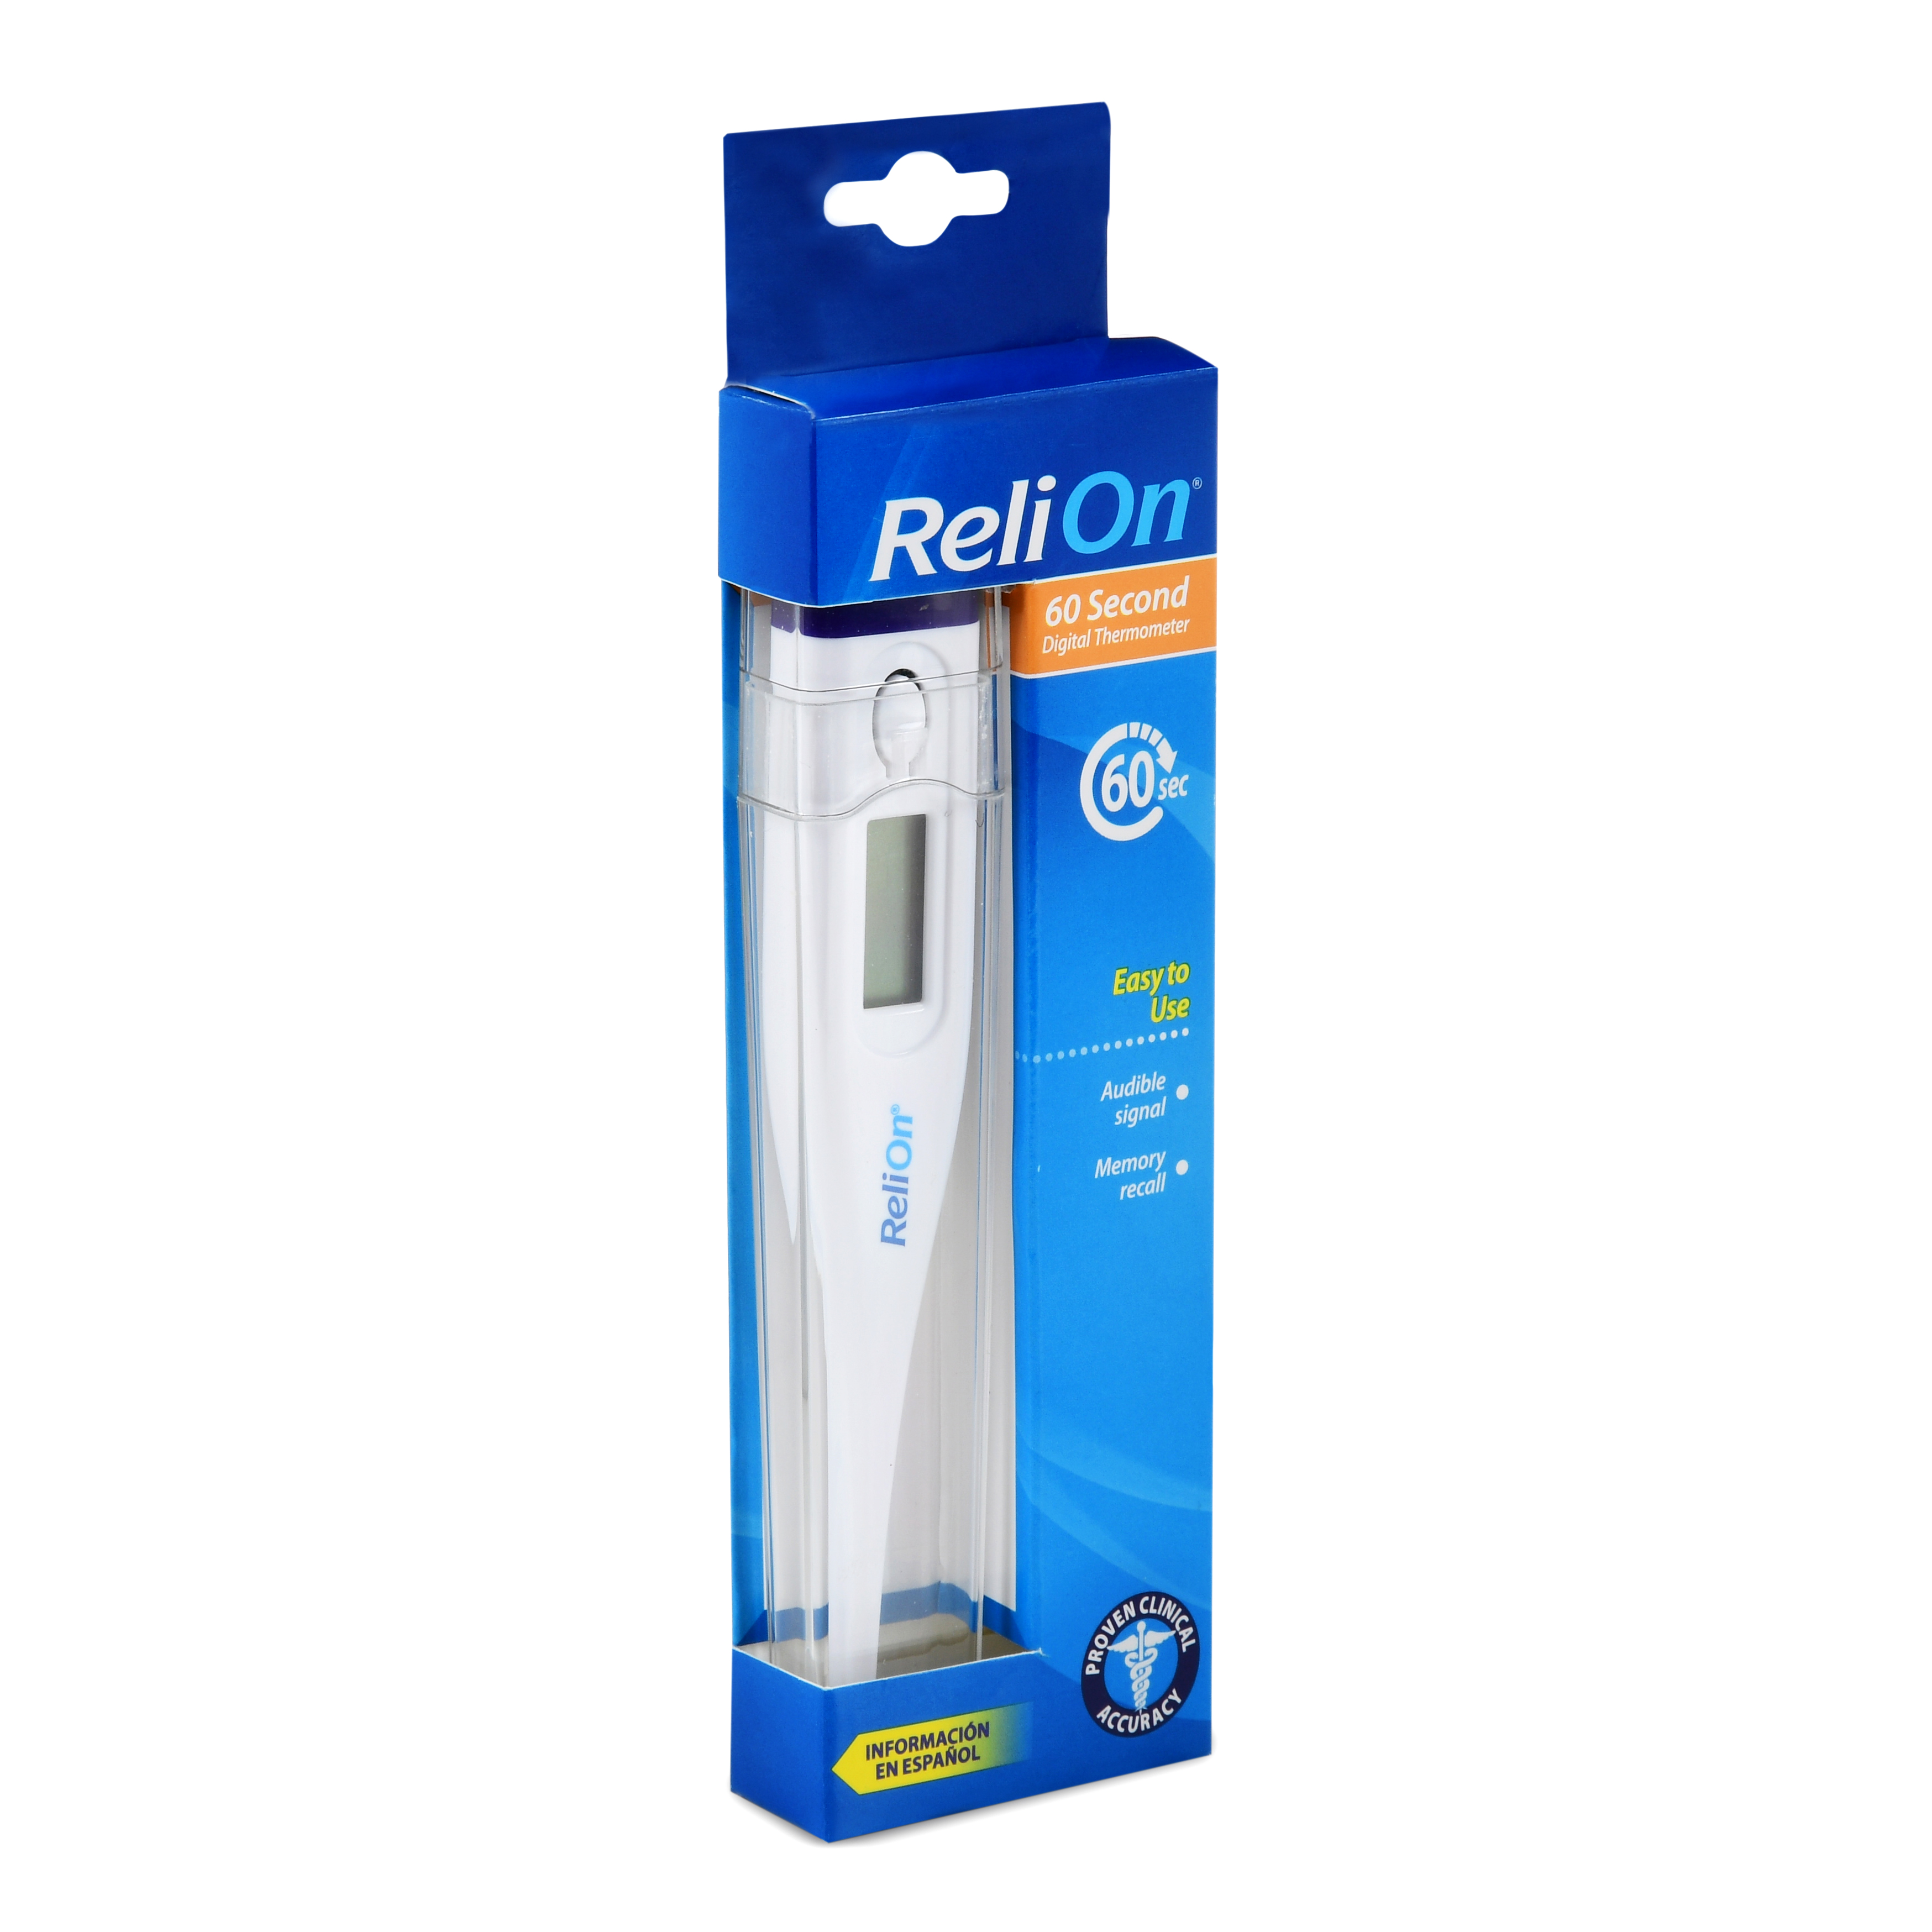 ReliOn 60 Second Digital Thermometer - image 2 of 8